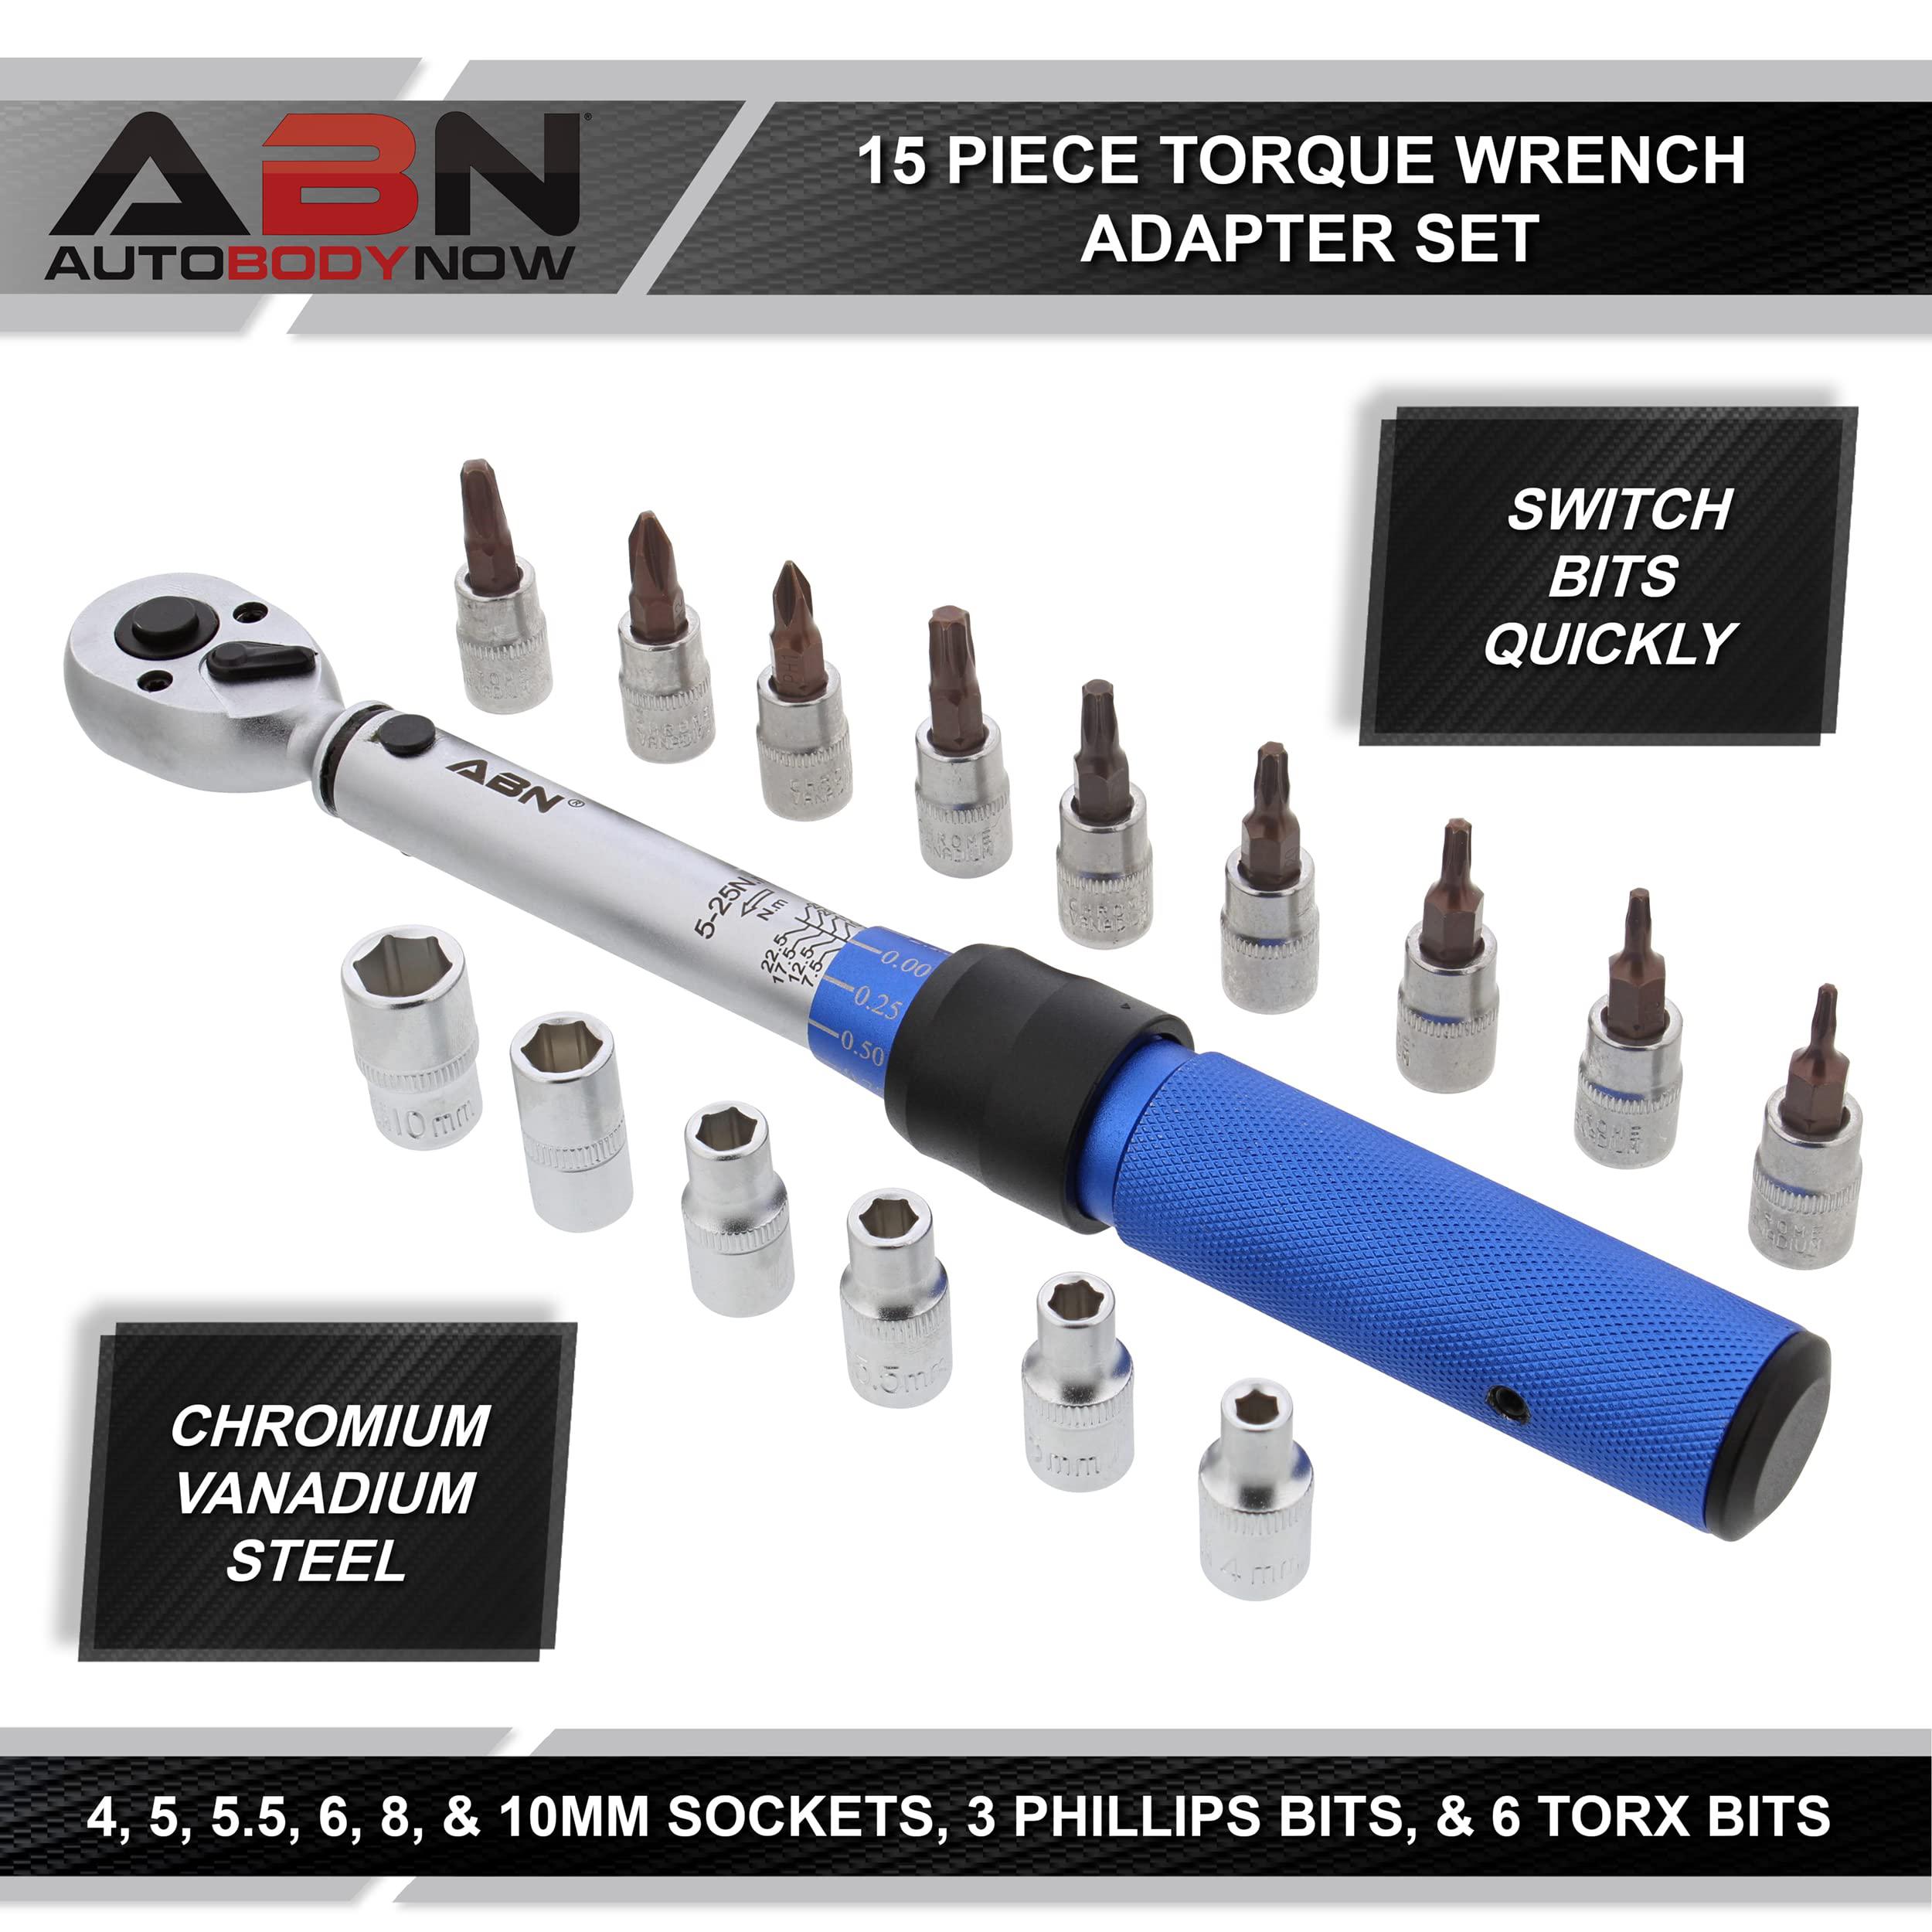 abn dual direction click torque wrench 1/4 drive 40-200 in/lb (5-25 nm) inch pound lug nut wrench and adapter 16pc set